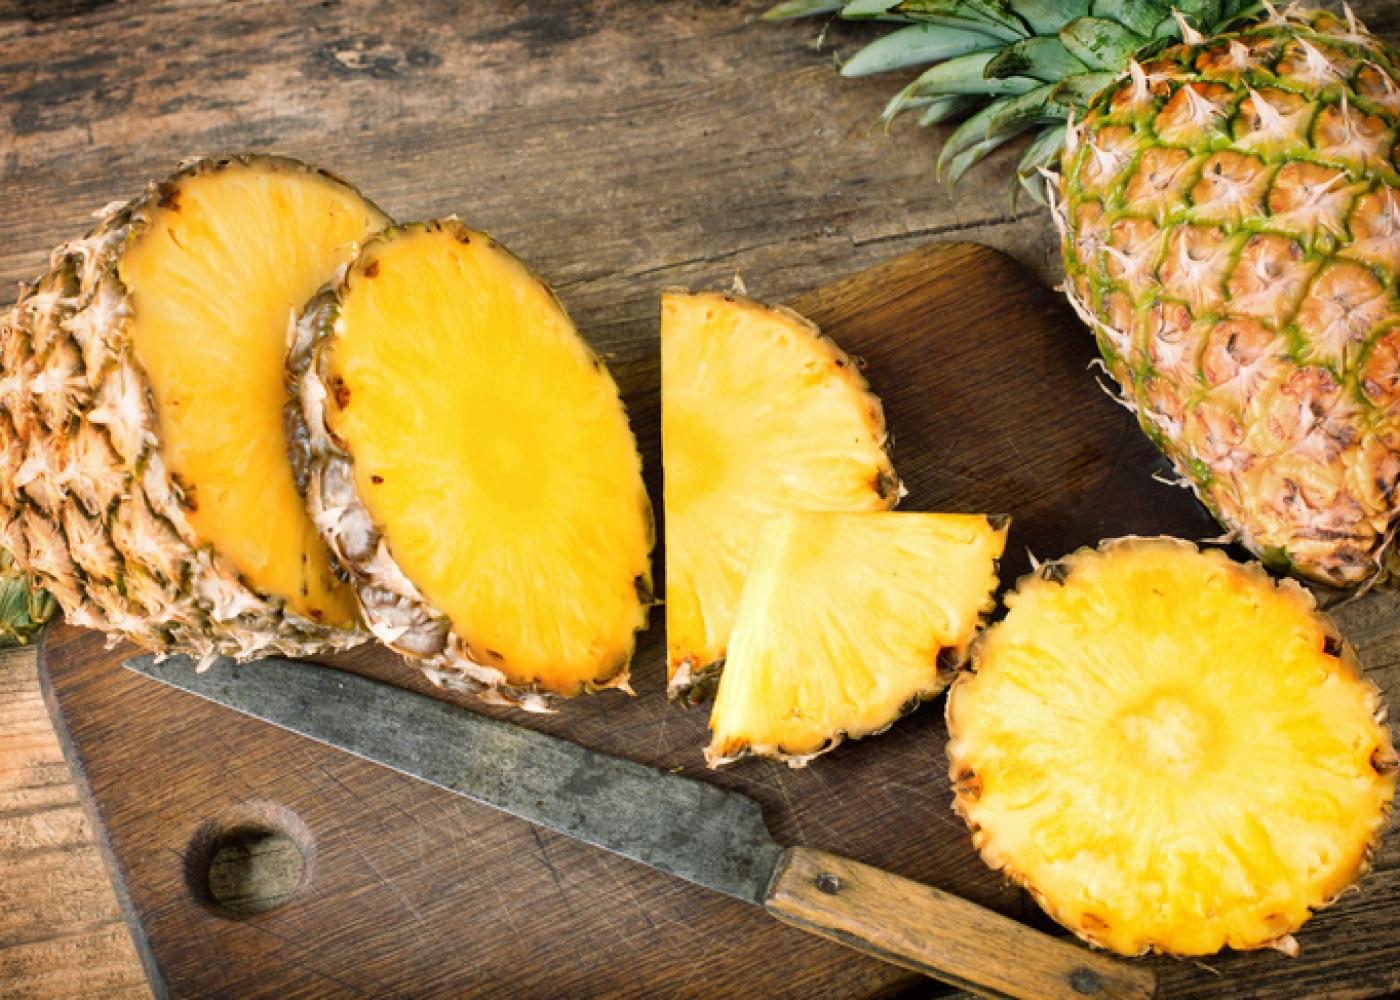 🍍 You Haven’t Really Lived Unless You’ve Tried at Least 12 of These Tropical Fruits Pineapple